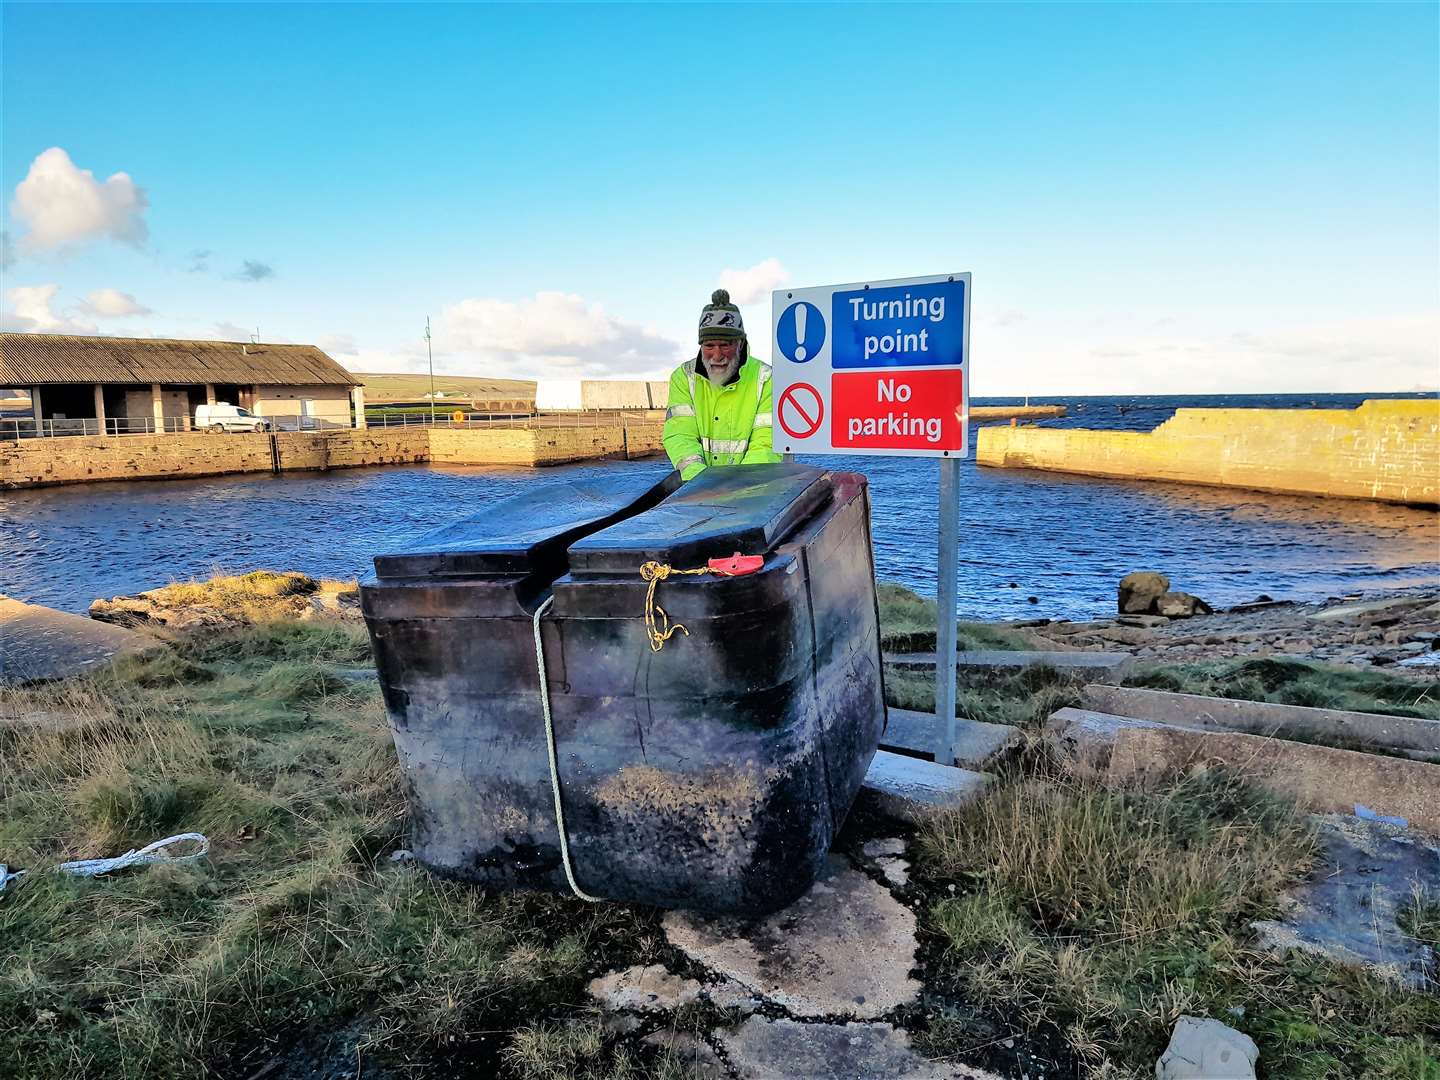 Allan Sinclair and his wife Dorcas had to empty the huge box from the water in it before it could be taken from the coast.